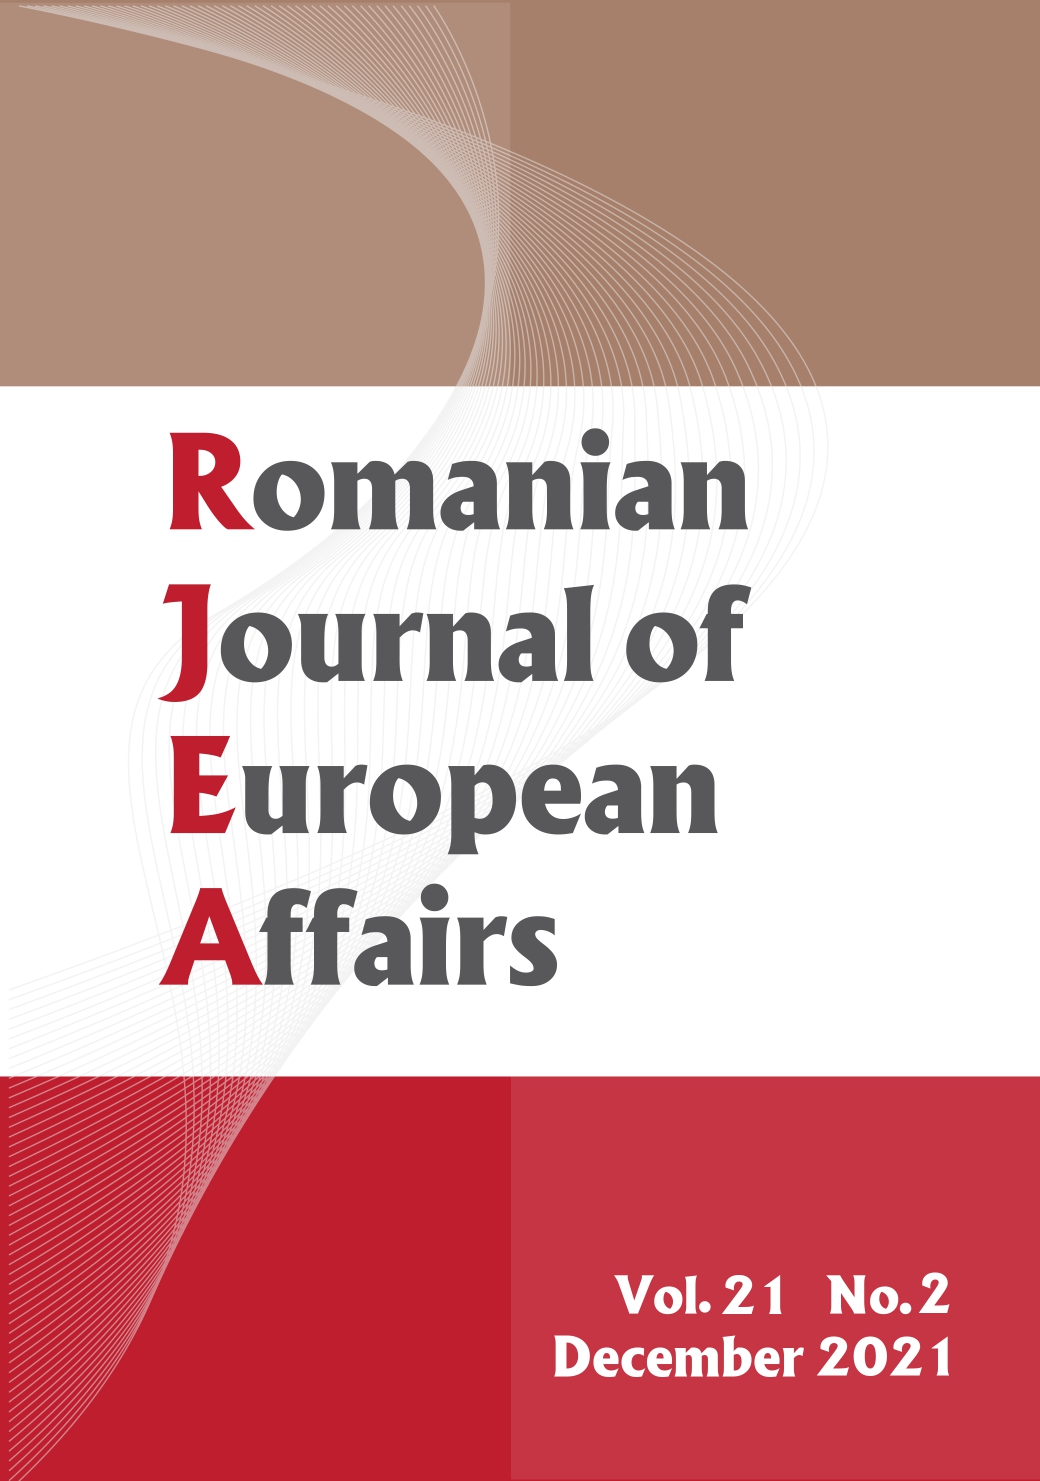 The Implementation of the European Pillar of Social Rights (EPSR) in the Post-Pandemic Era